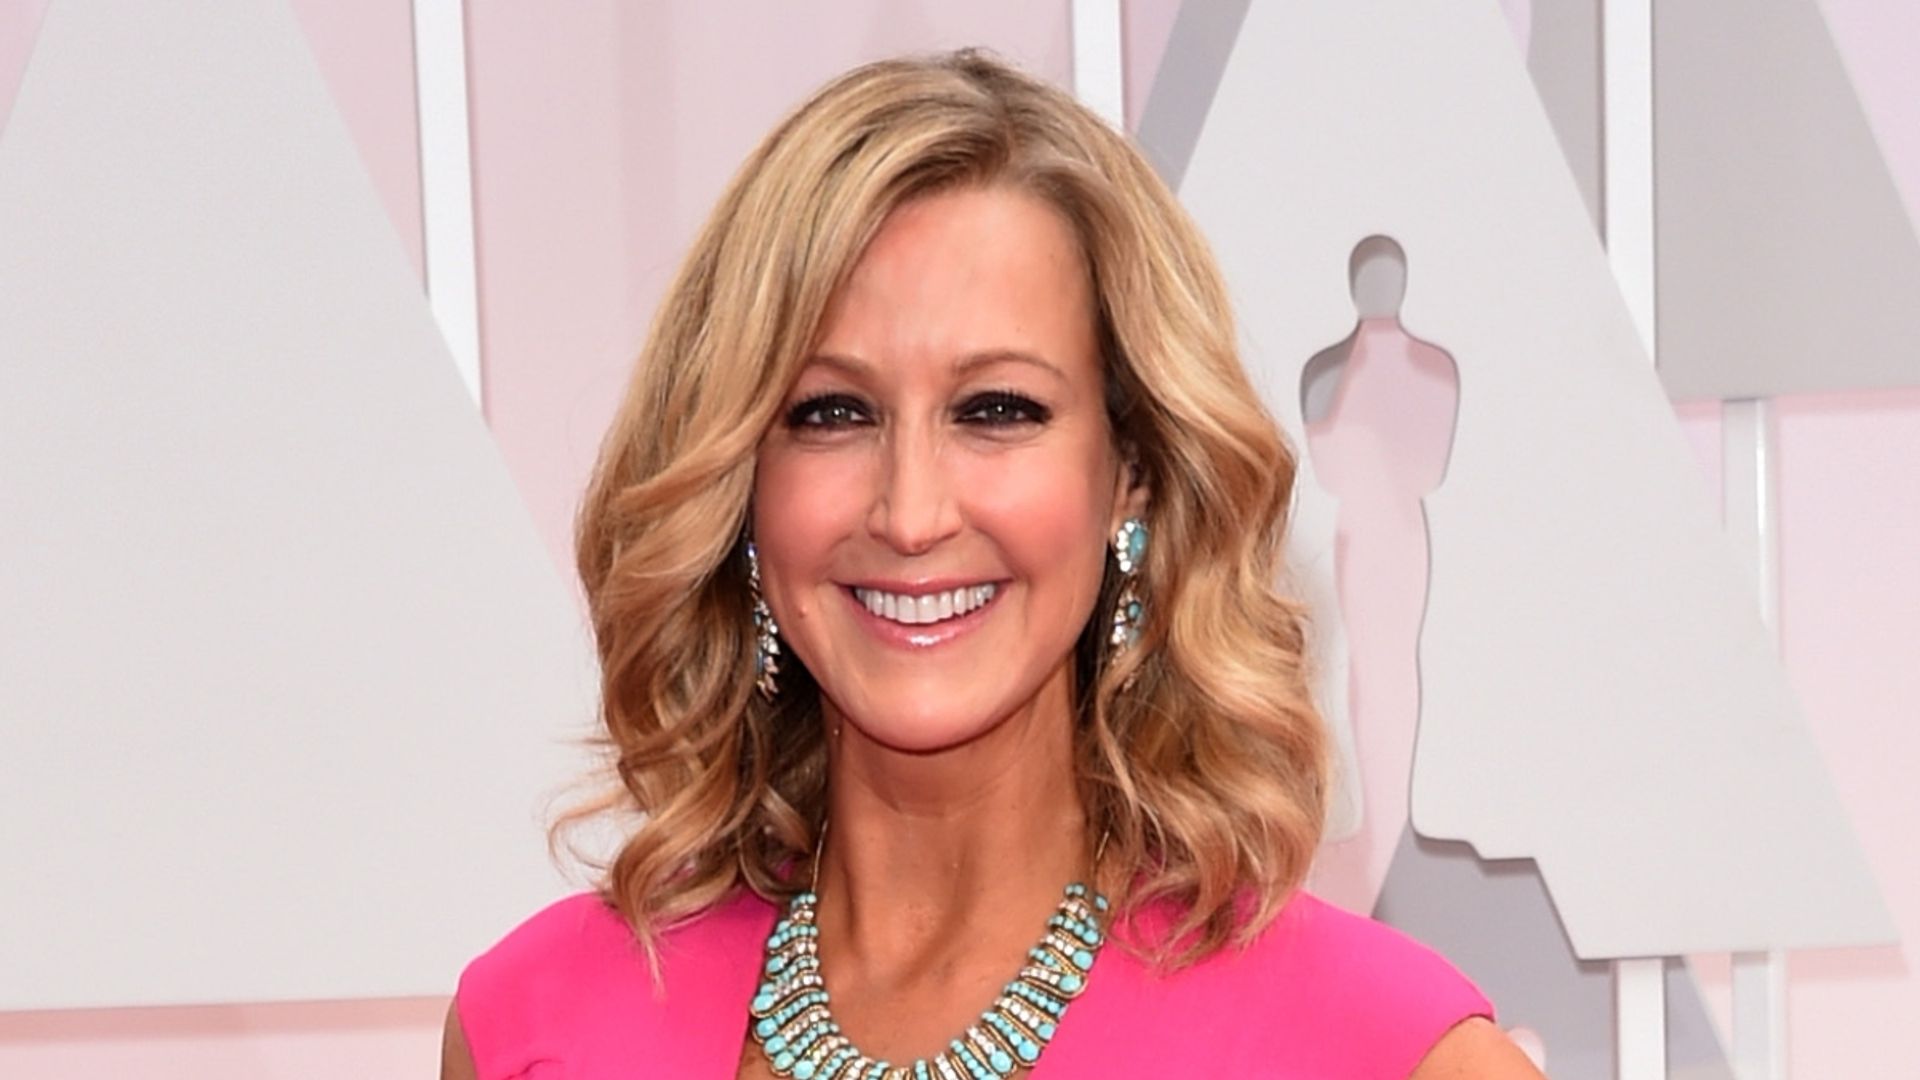 Lara Spencer's family photos have fans all noticing one thing